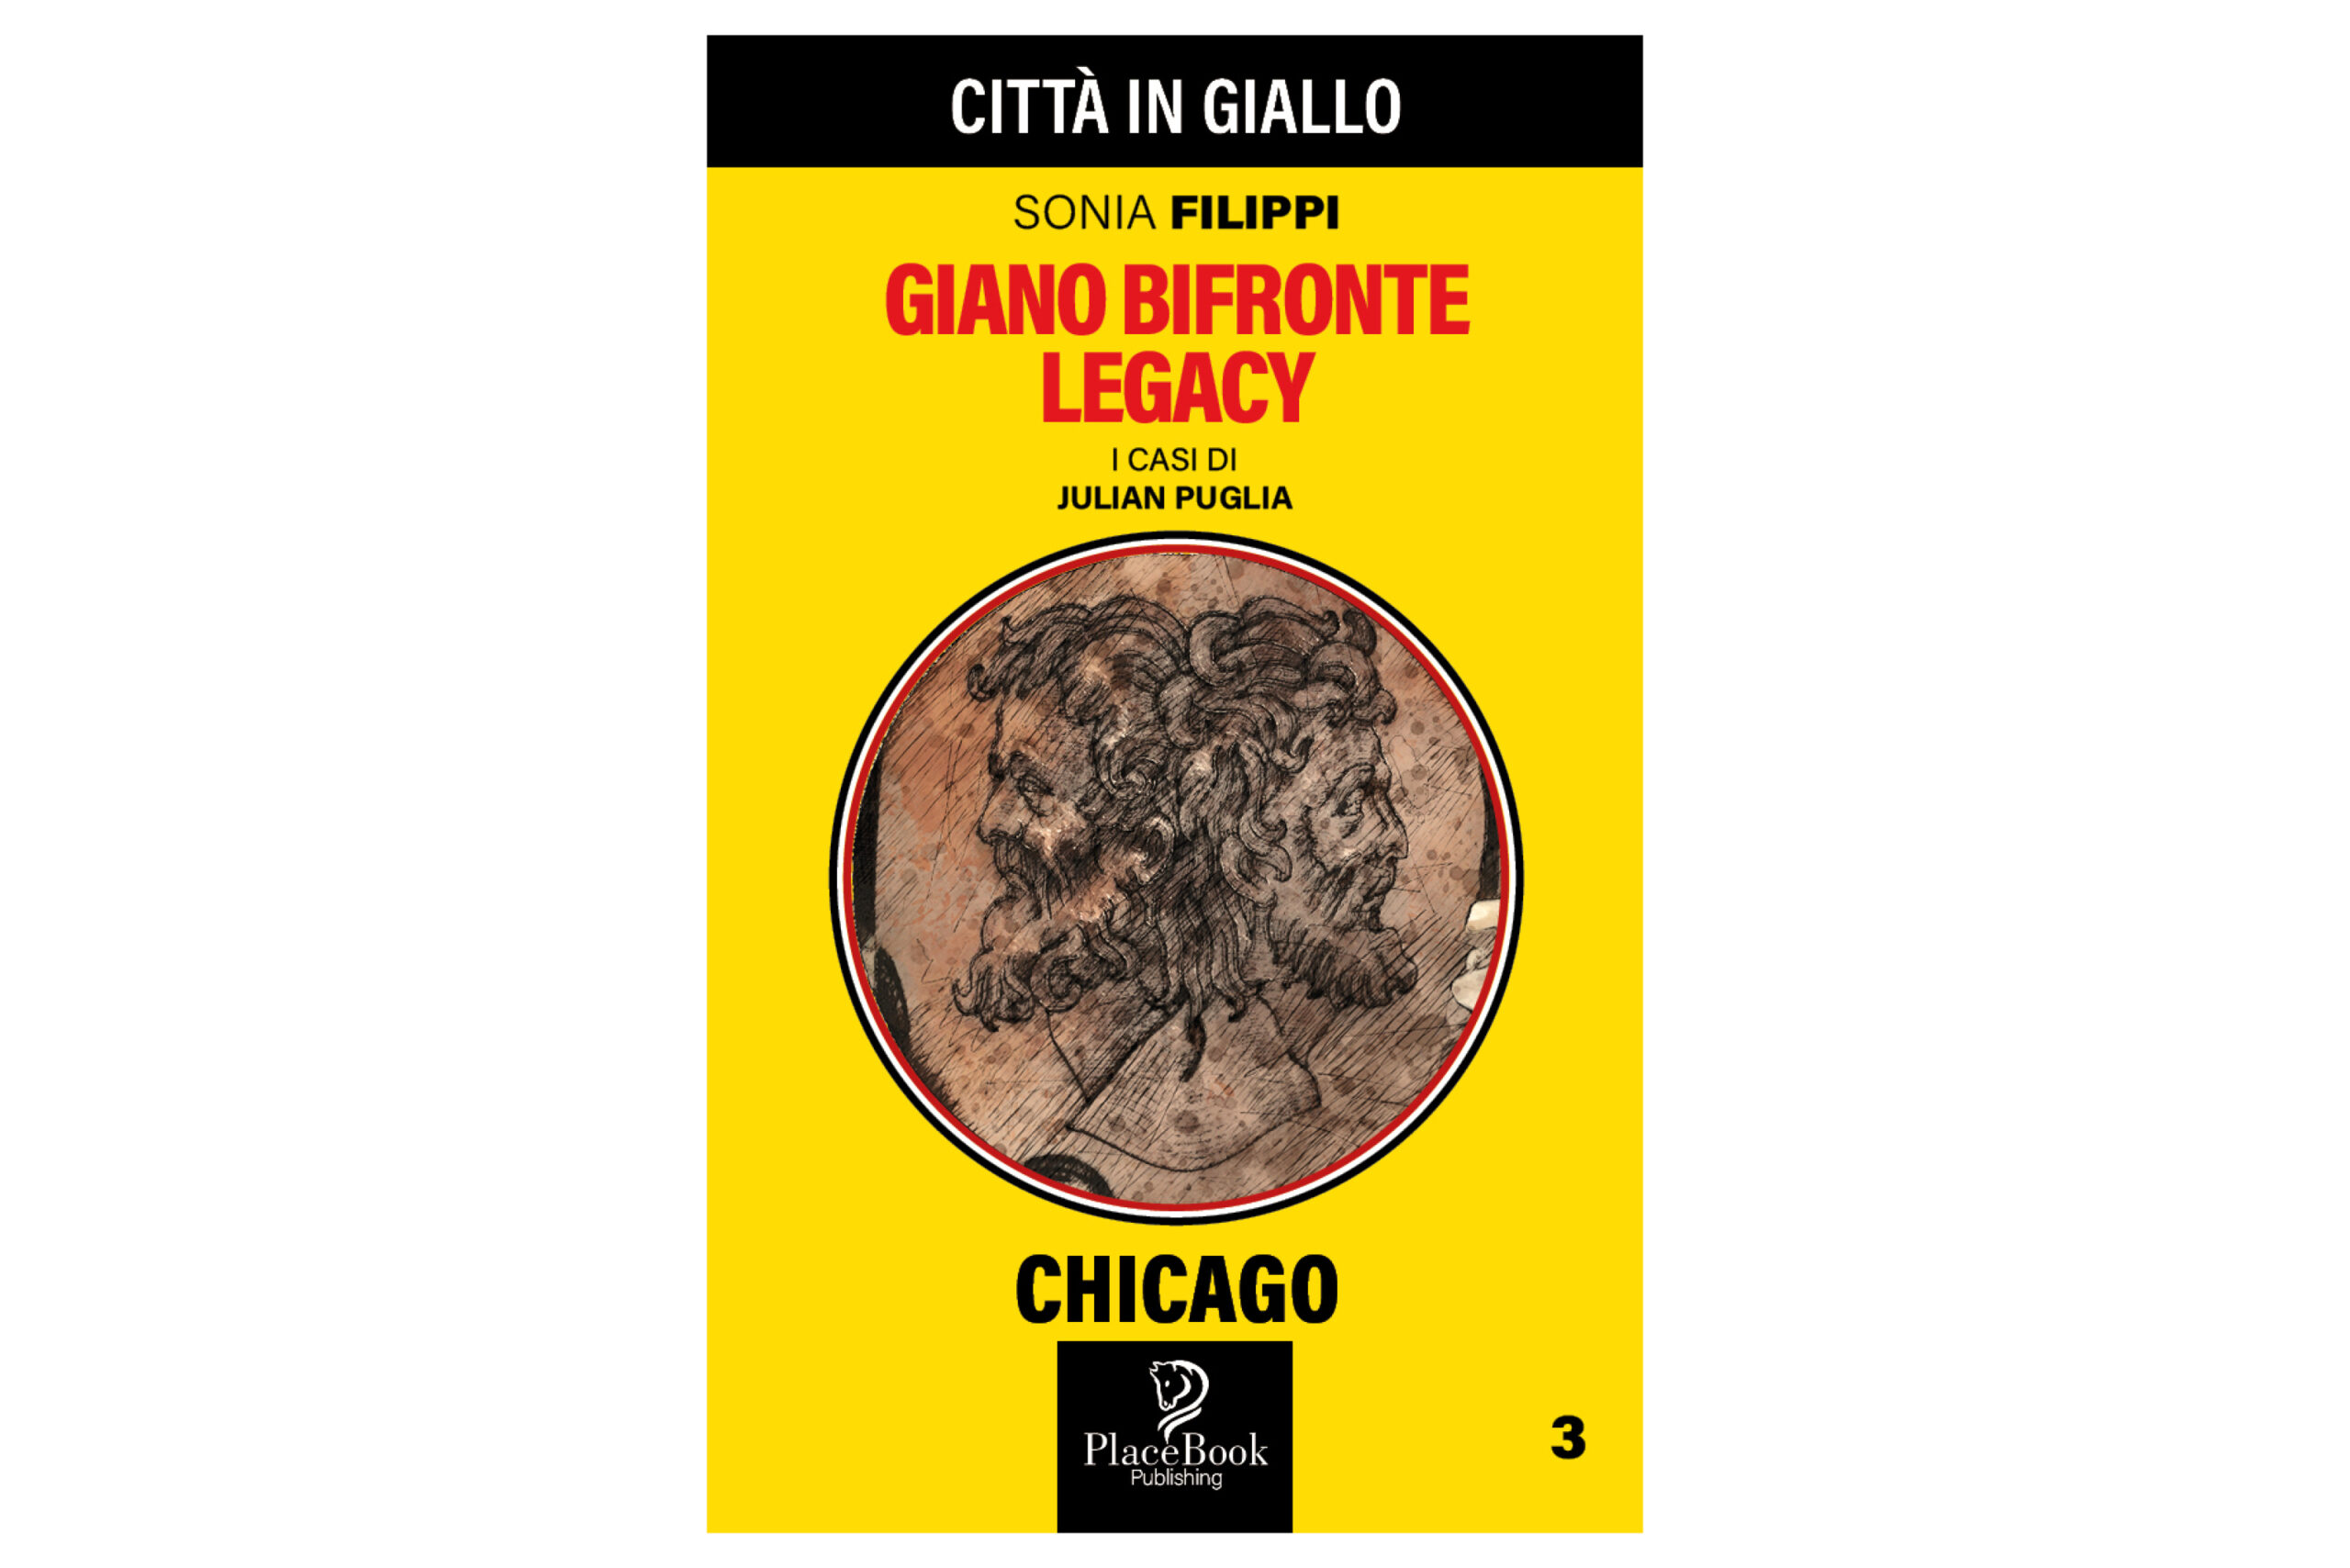 Giano Bifronte legacy – Chicago 3